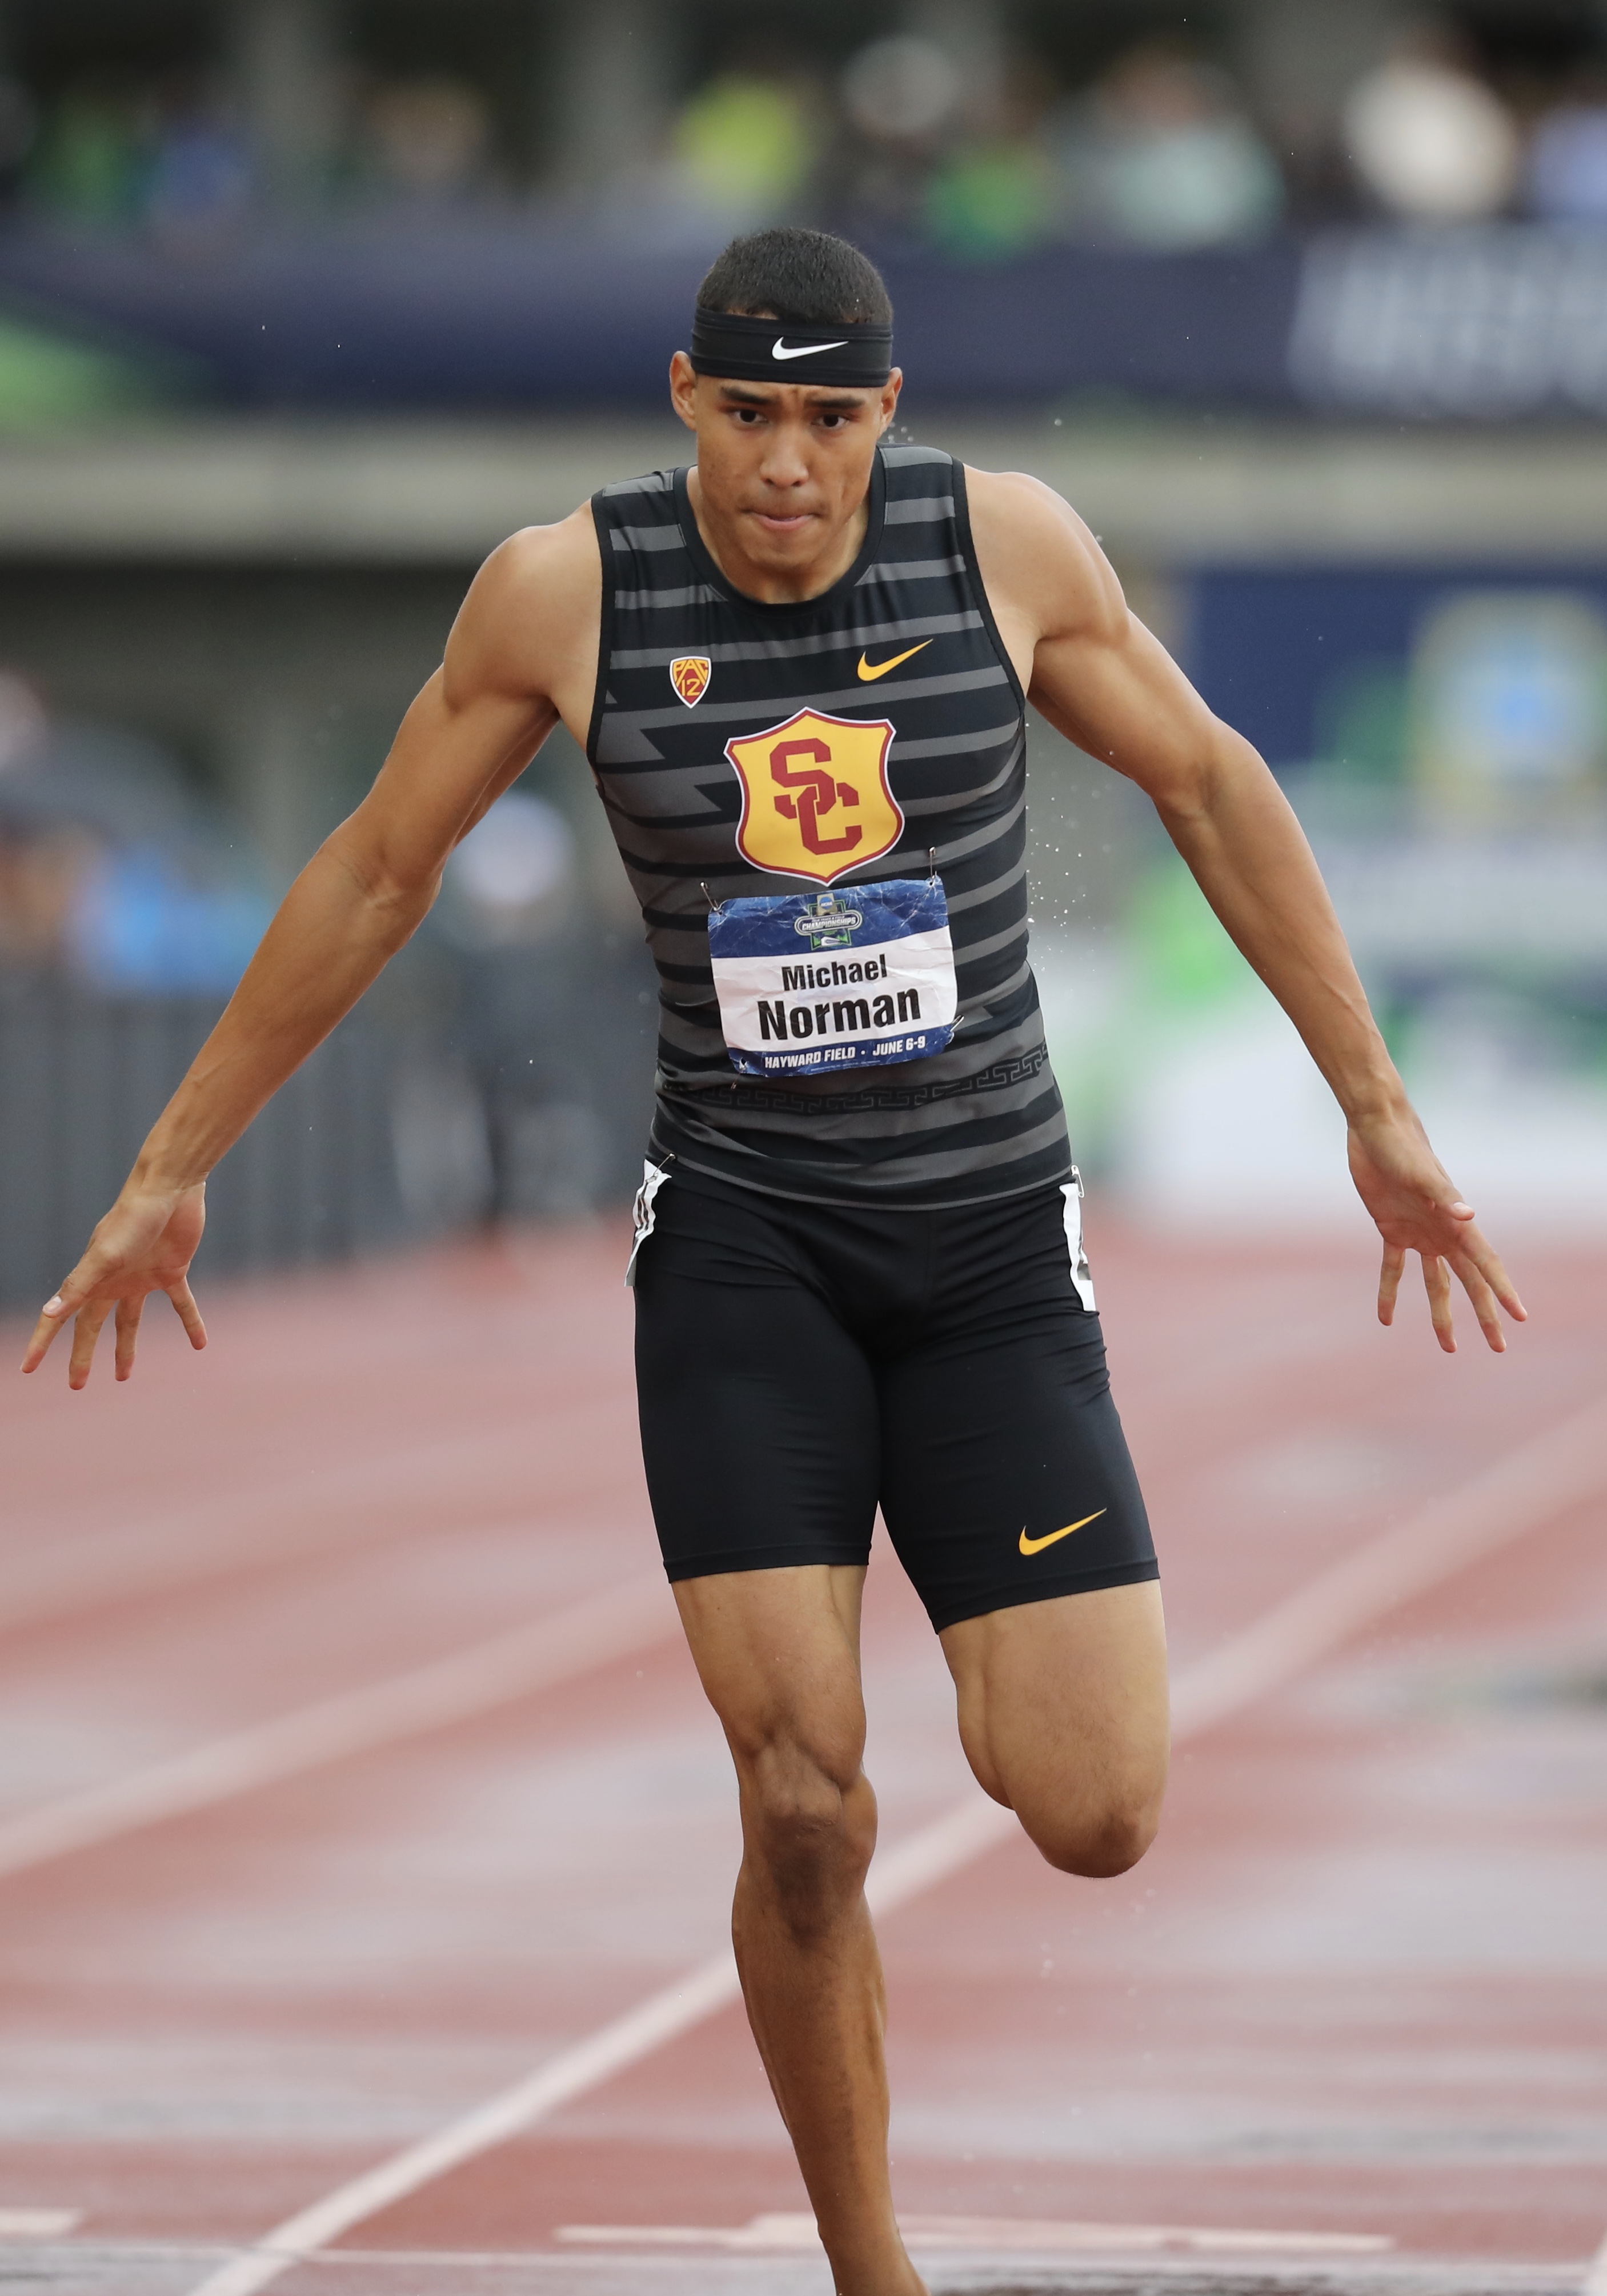 Sports News Roundup: American Norman misses 400m final due to injury; Lyles beats asthma and the blues to conquer the world